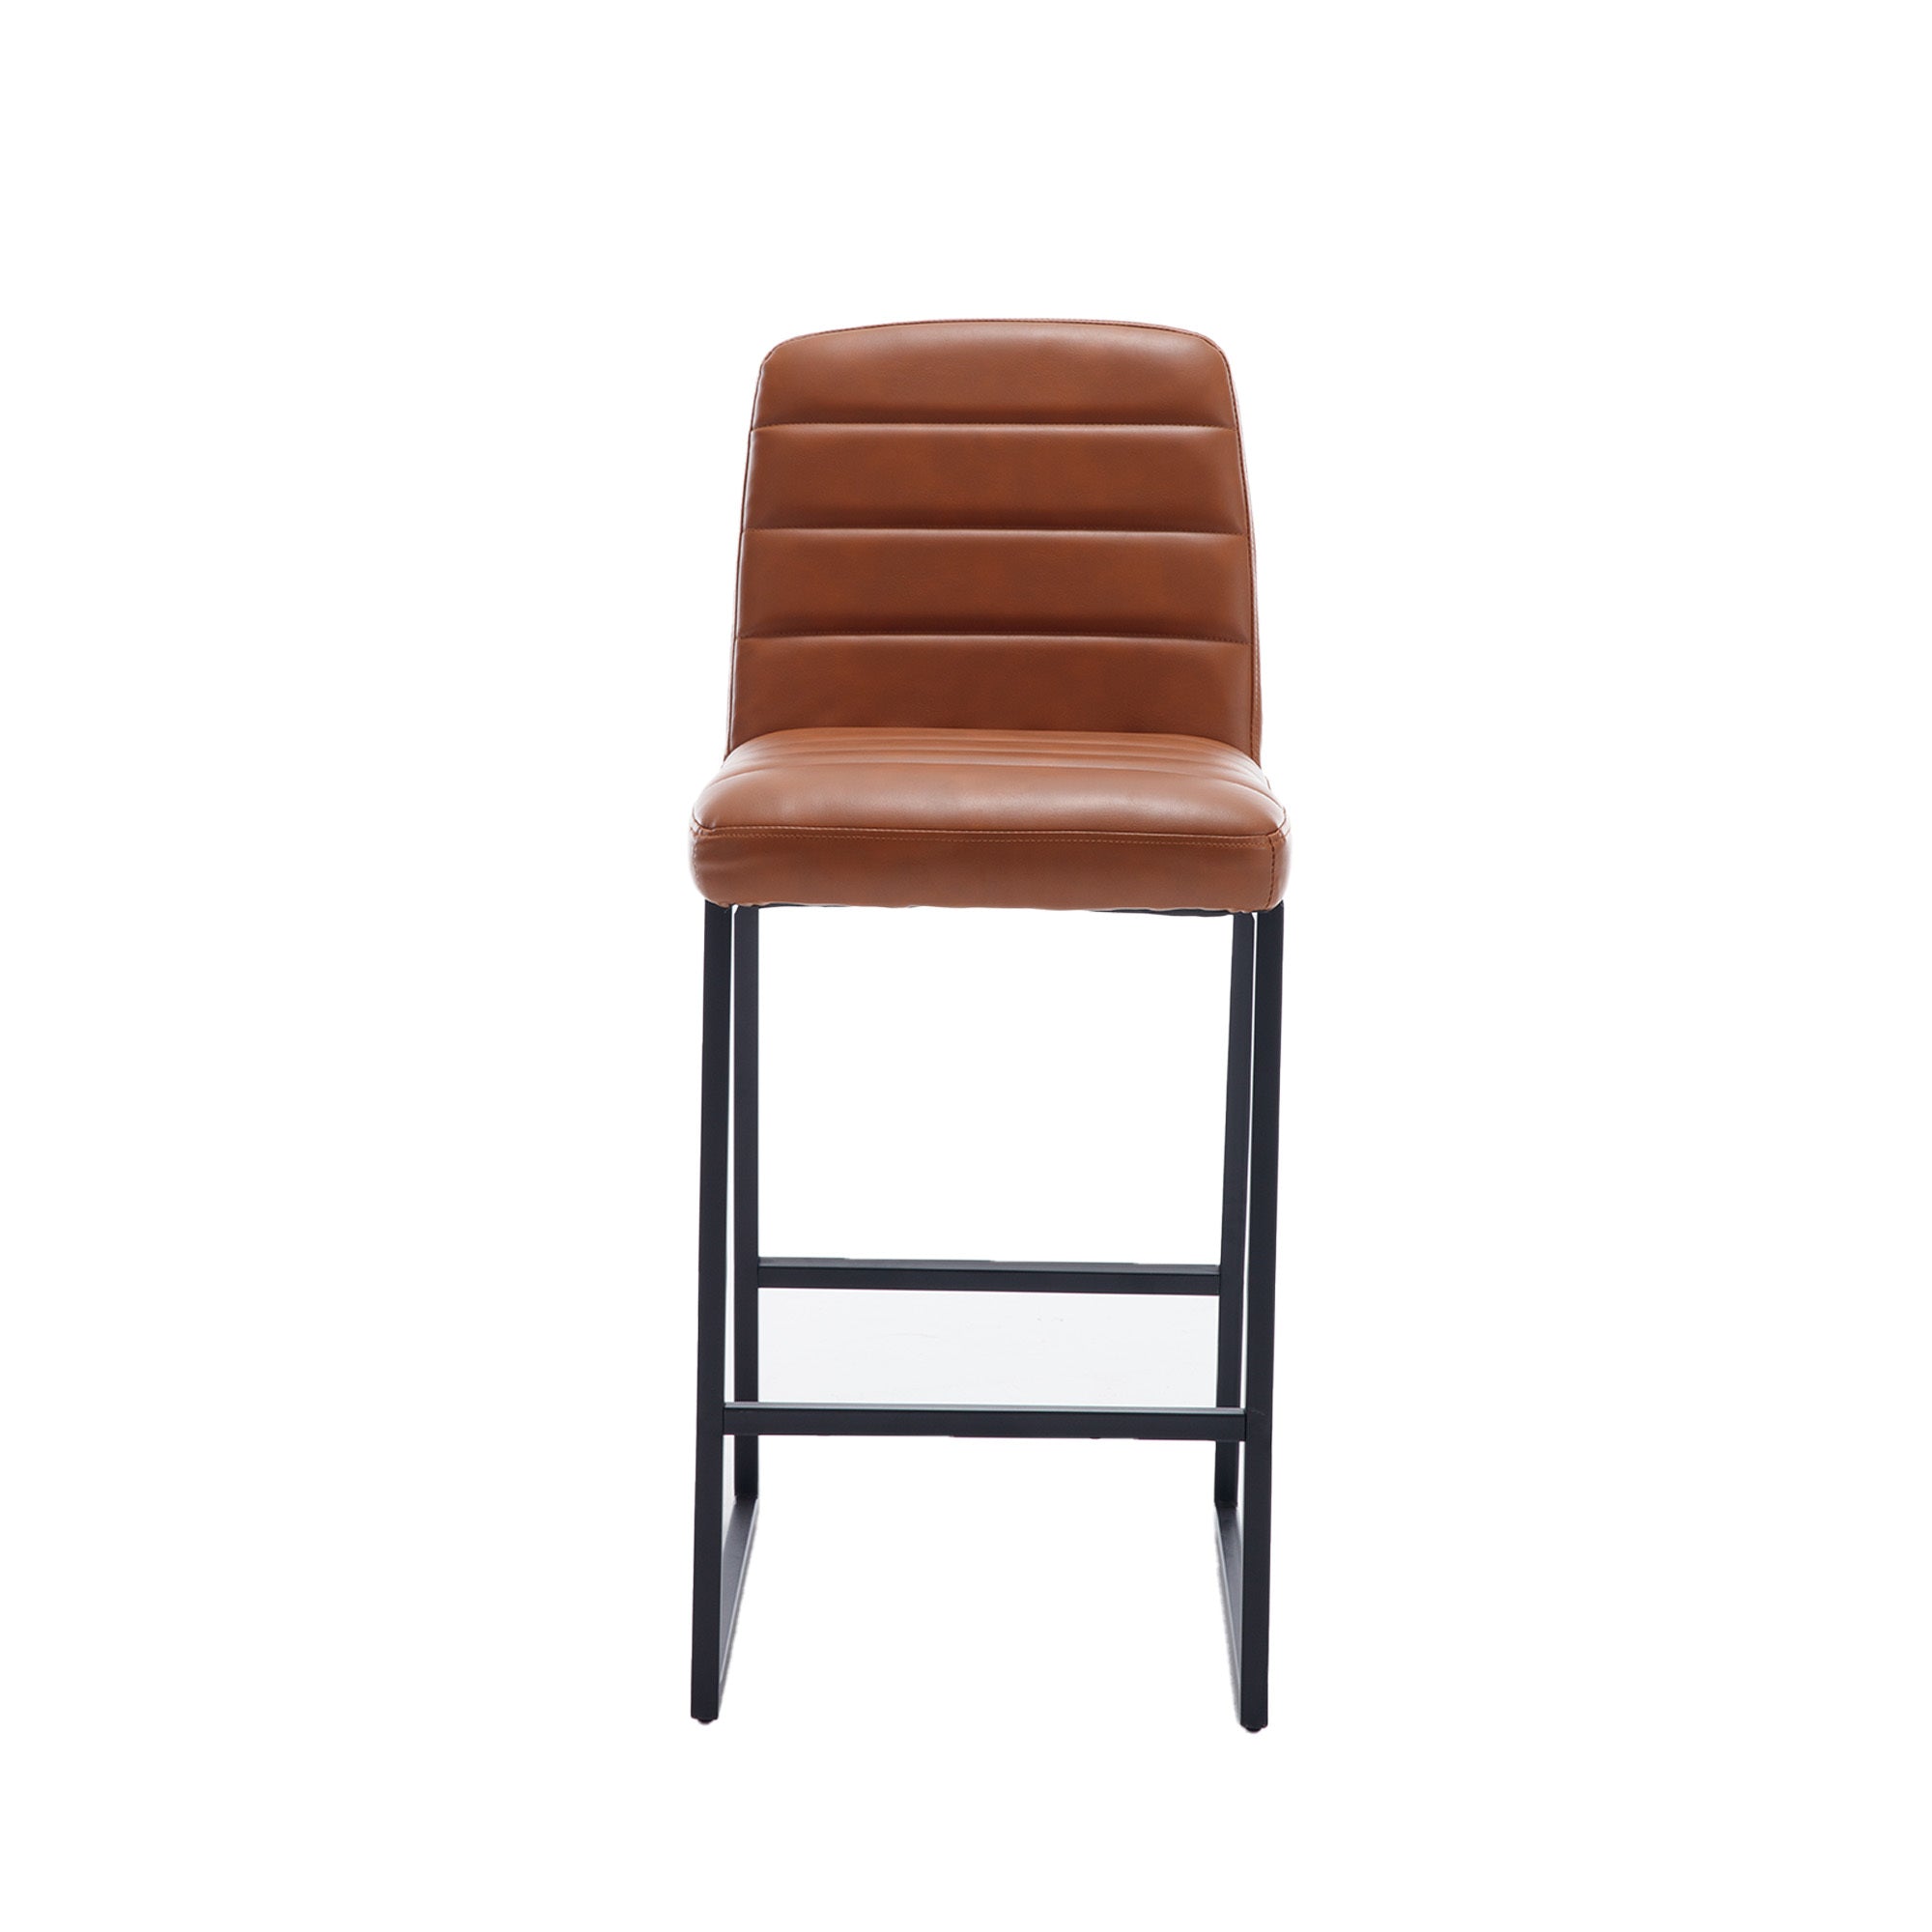 Low Bar Stools Set of 2 Bar Chairs for Living Room brown pu-kitchen-foam-dry clean-modern-bar